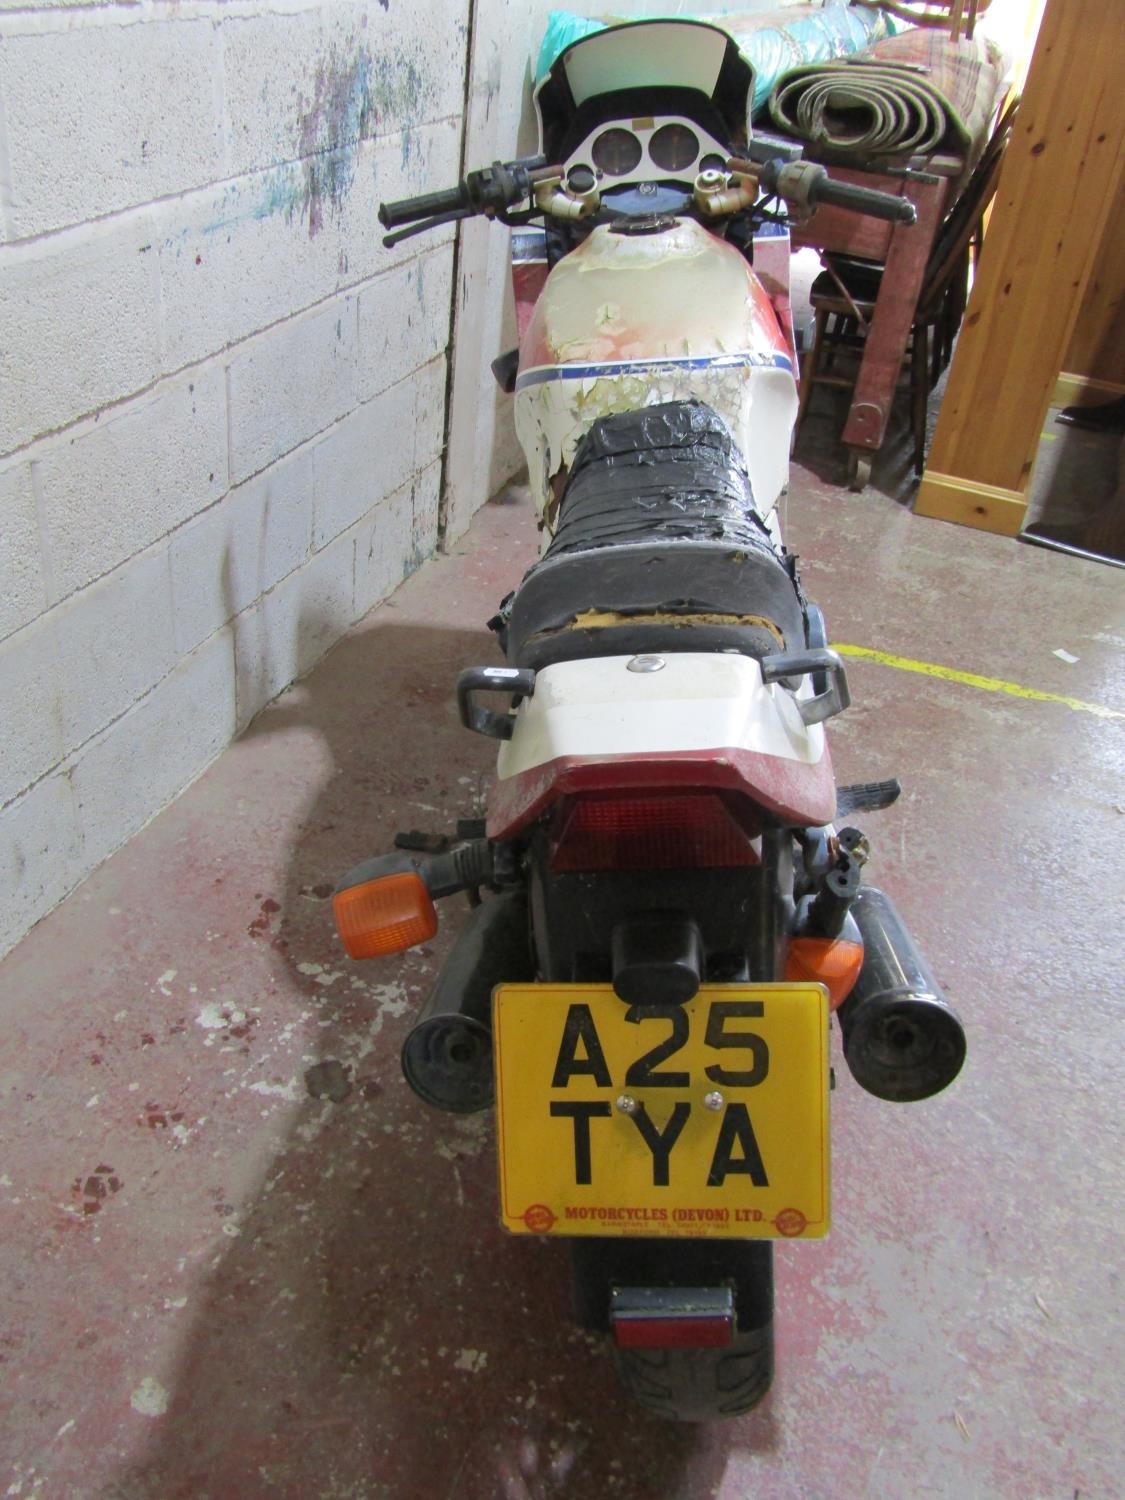 A Honda VF750 V-Twin motorcycle, registration number A25 TWA (no V5C logbook present) Sold without - Image 3 of 10